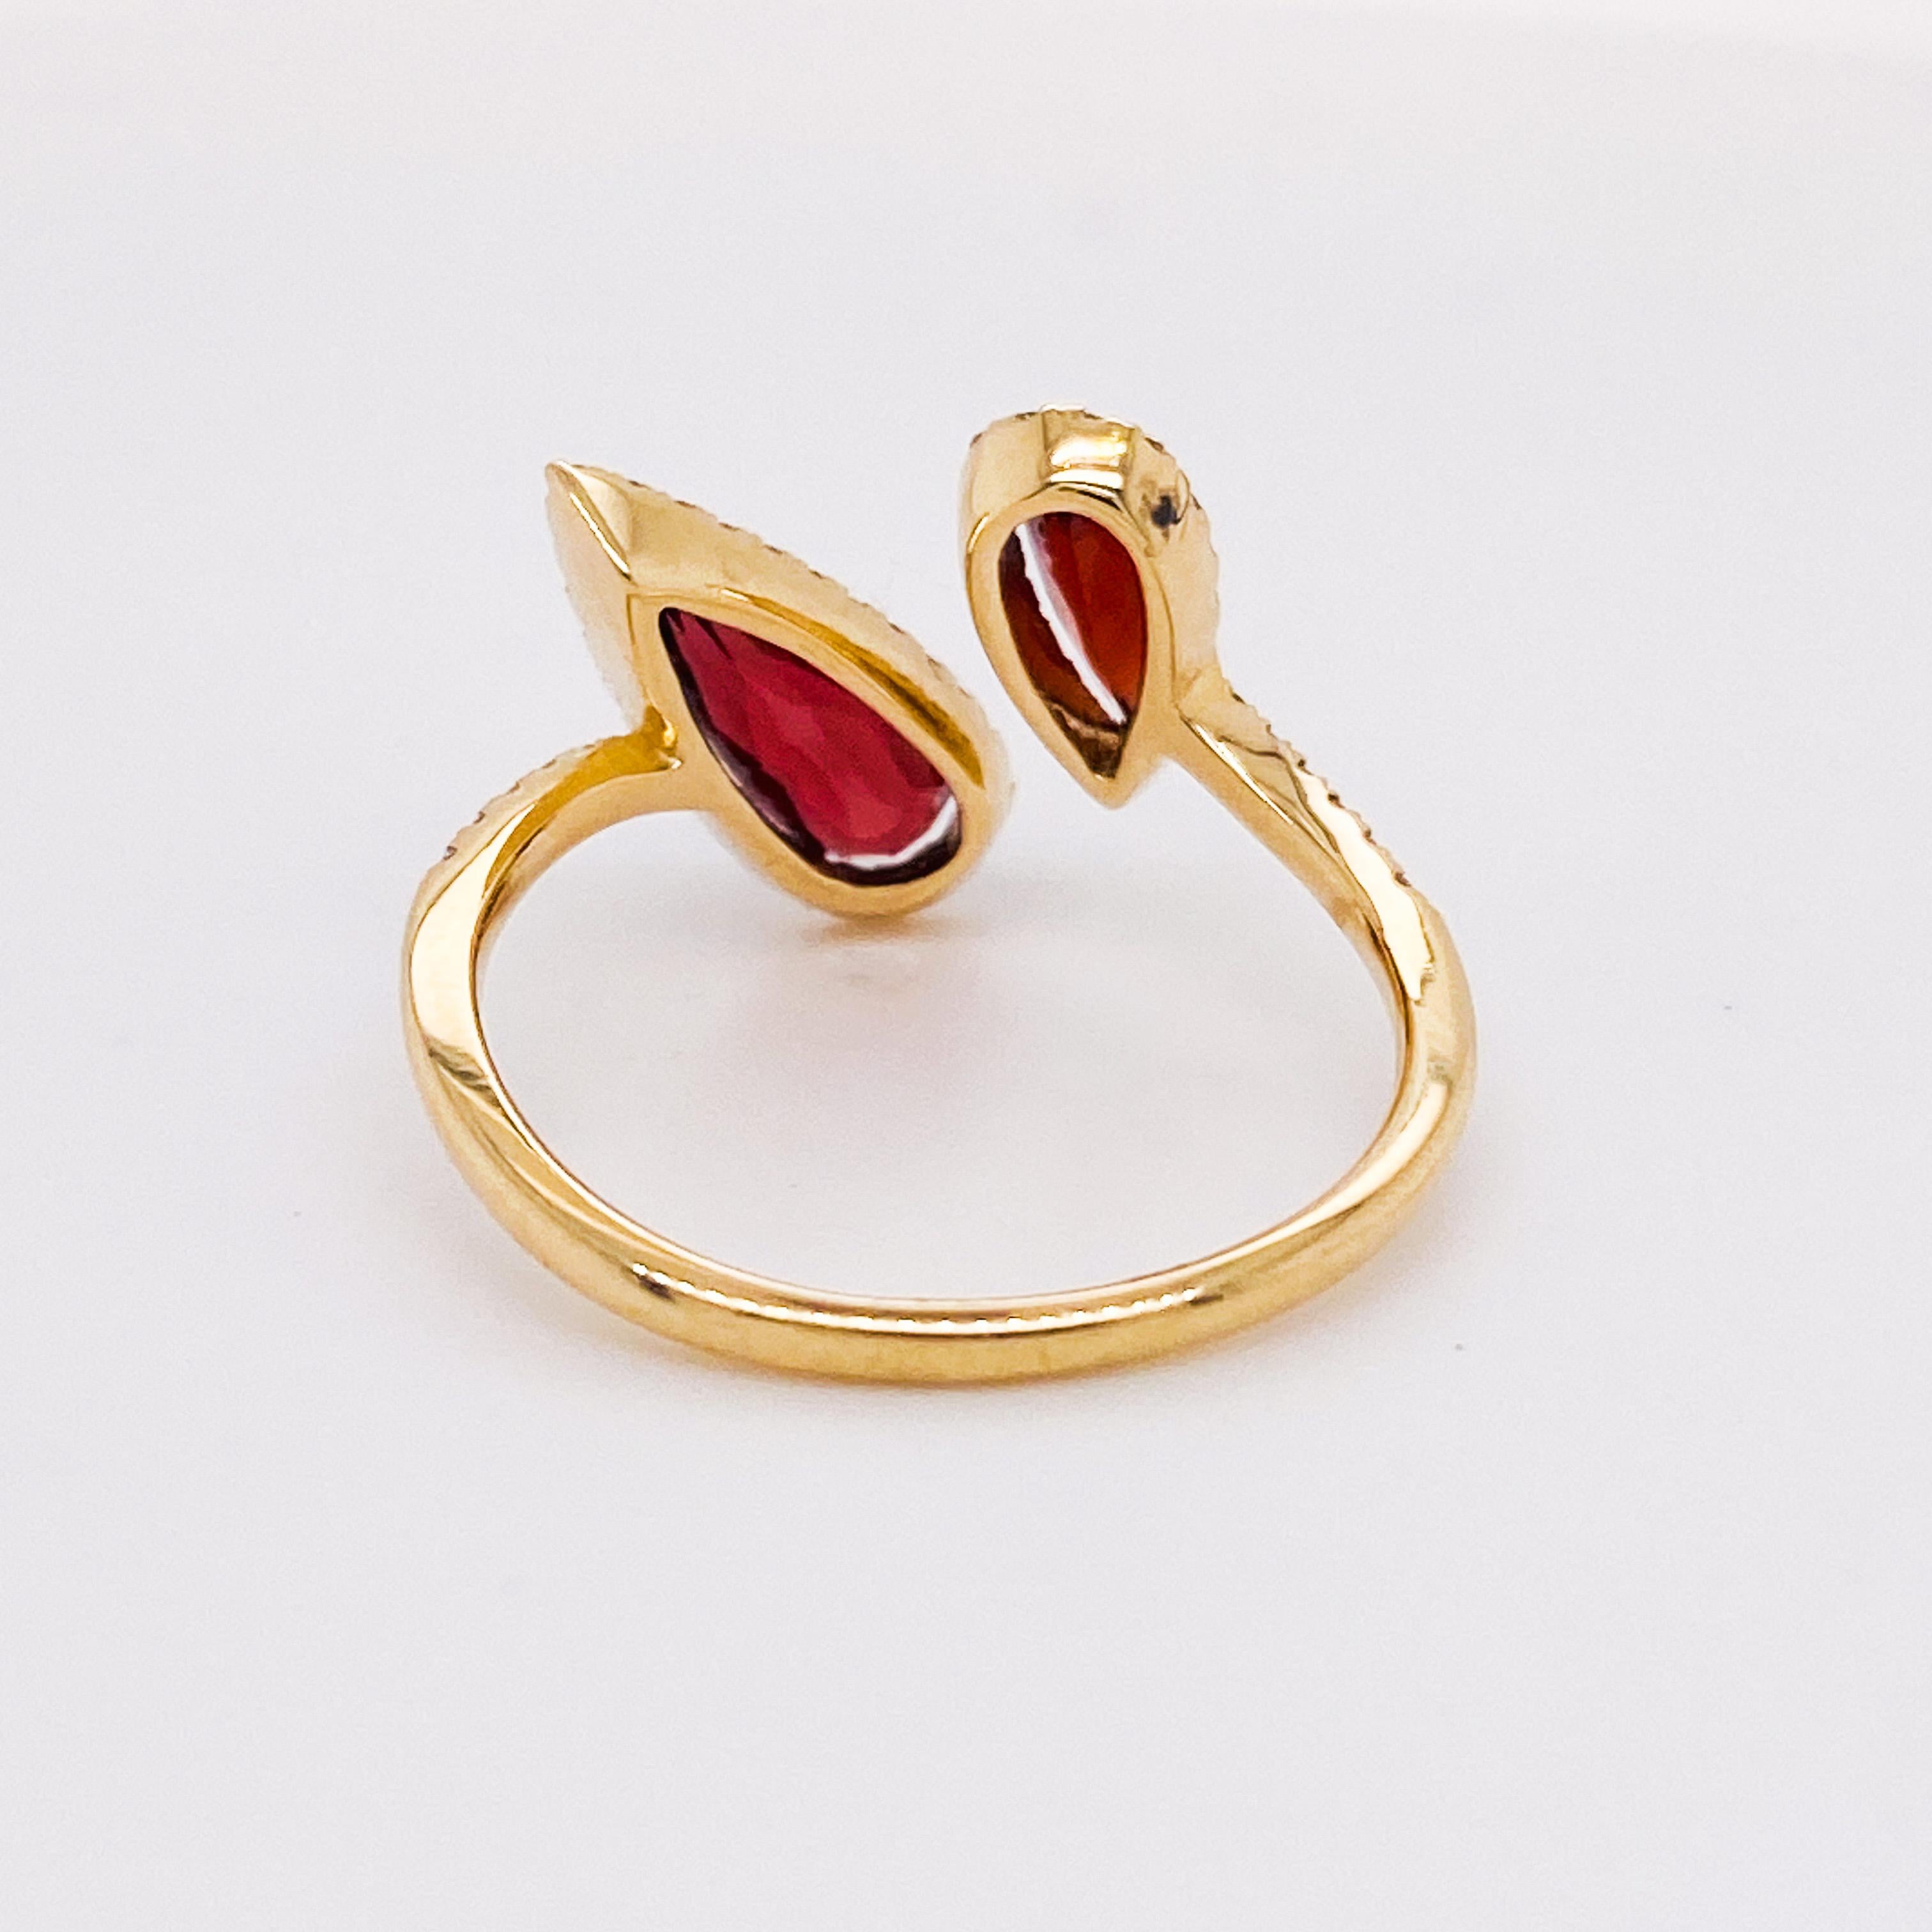 For Sale:  Toi et Moi Garnet Bypass Ring w Diamond Halos You and Me Ring in 14k Gold 3